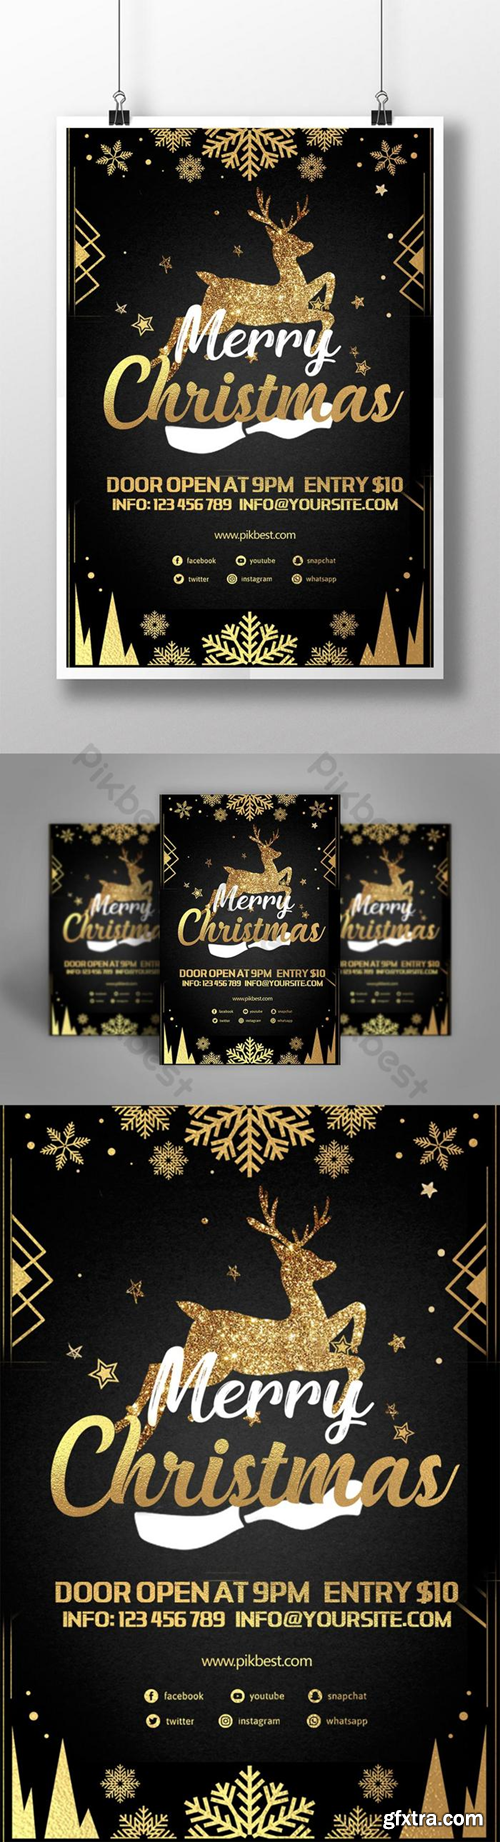 Black And Gold Merry Christmas Party Poster psd Template PSD Template PSD